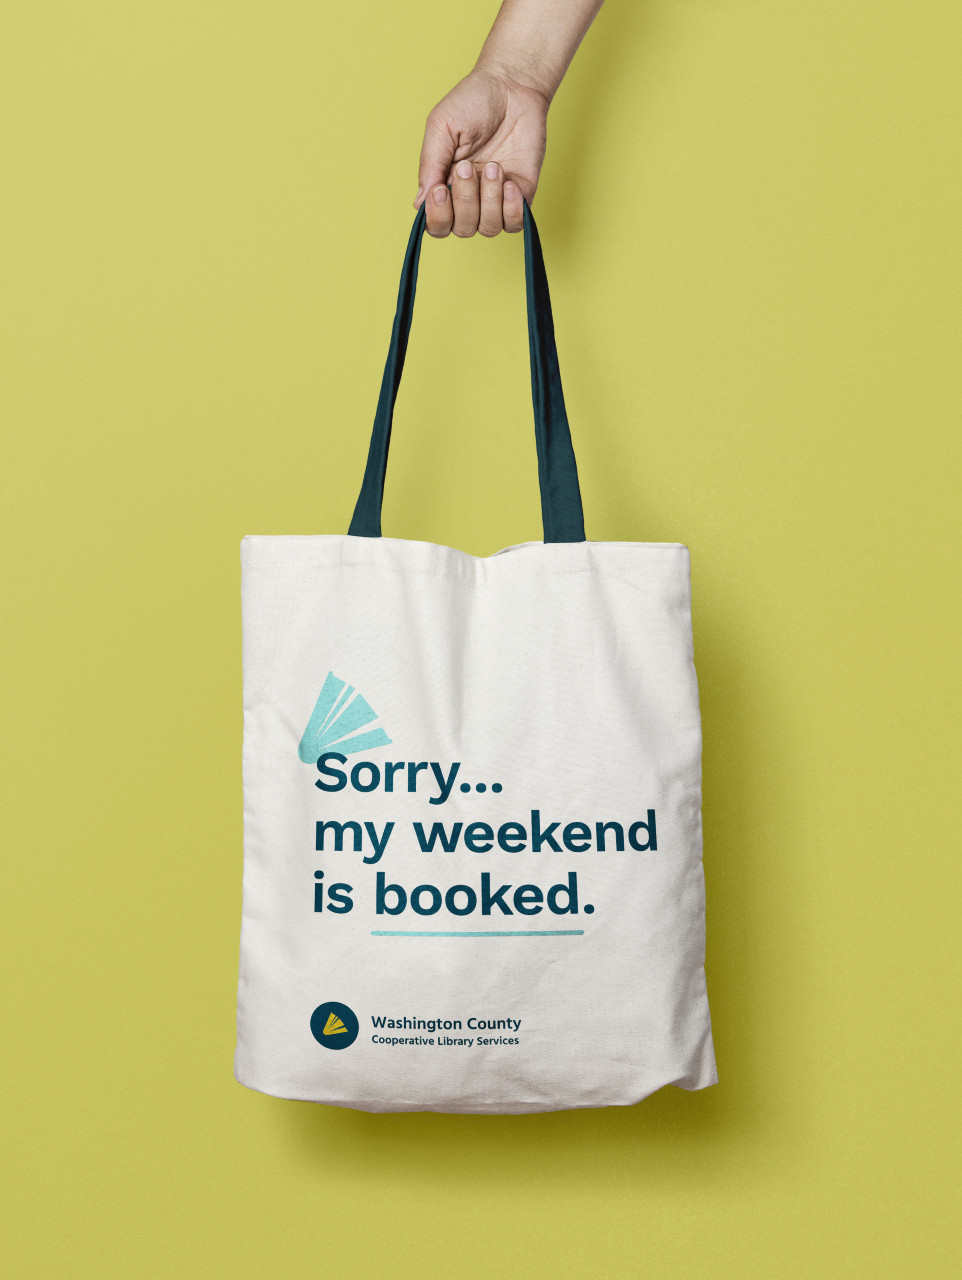 Tote bag that says: Sorry my weekend is booked.